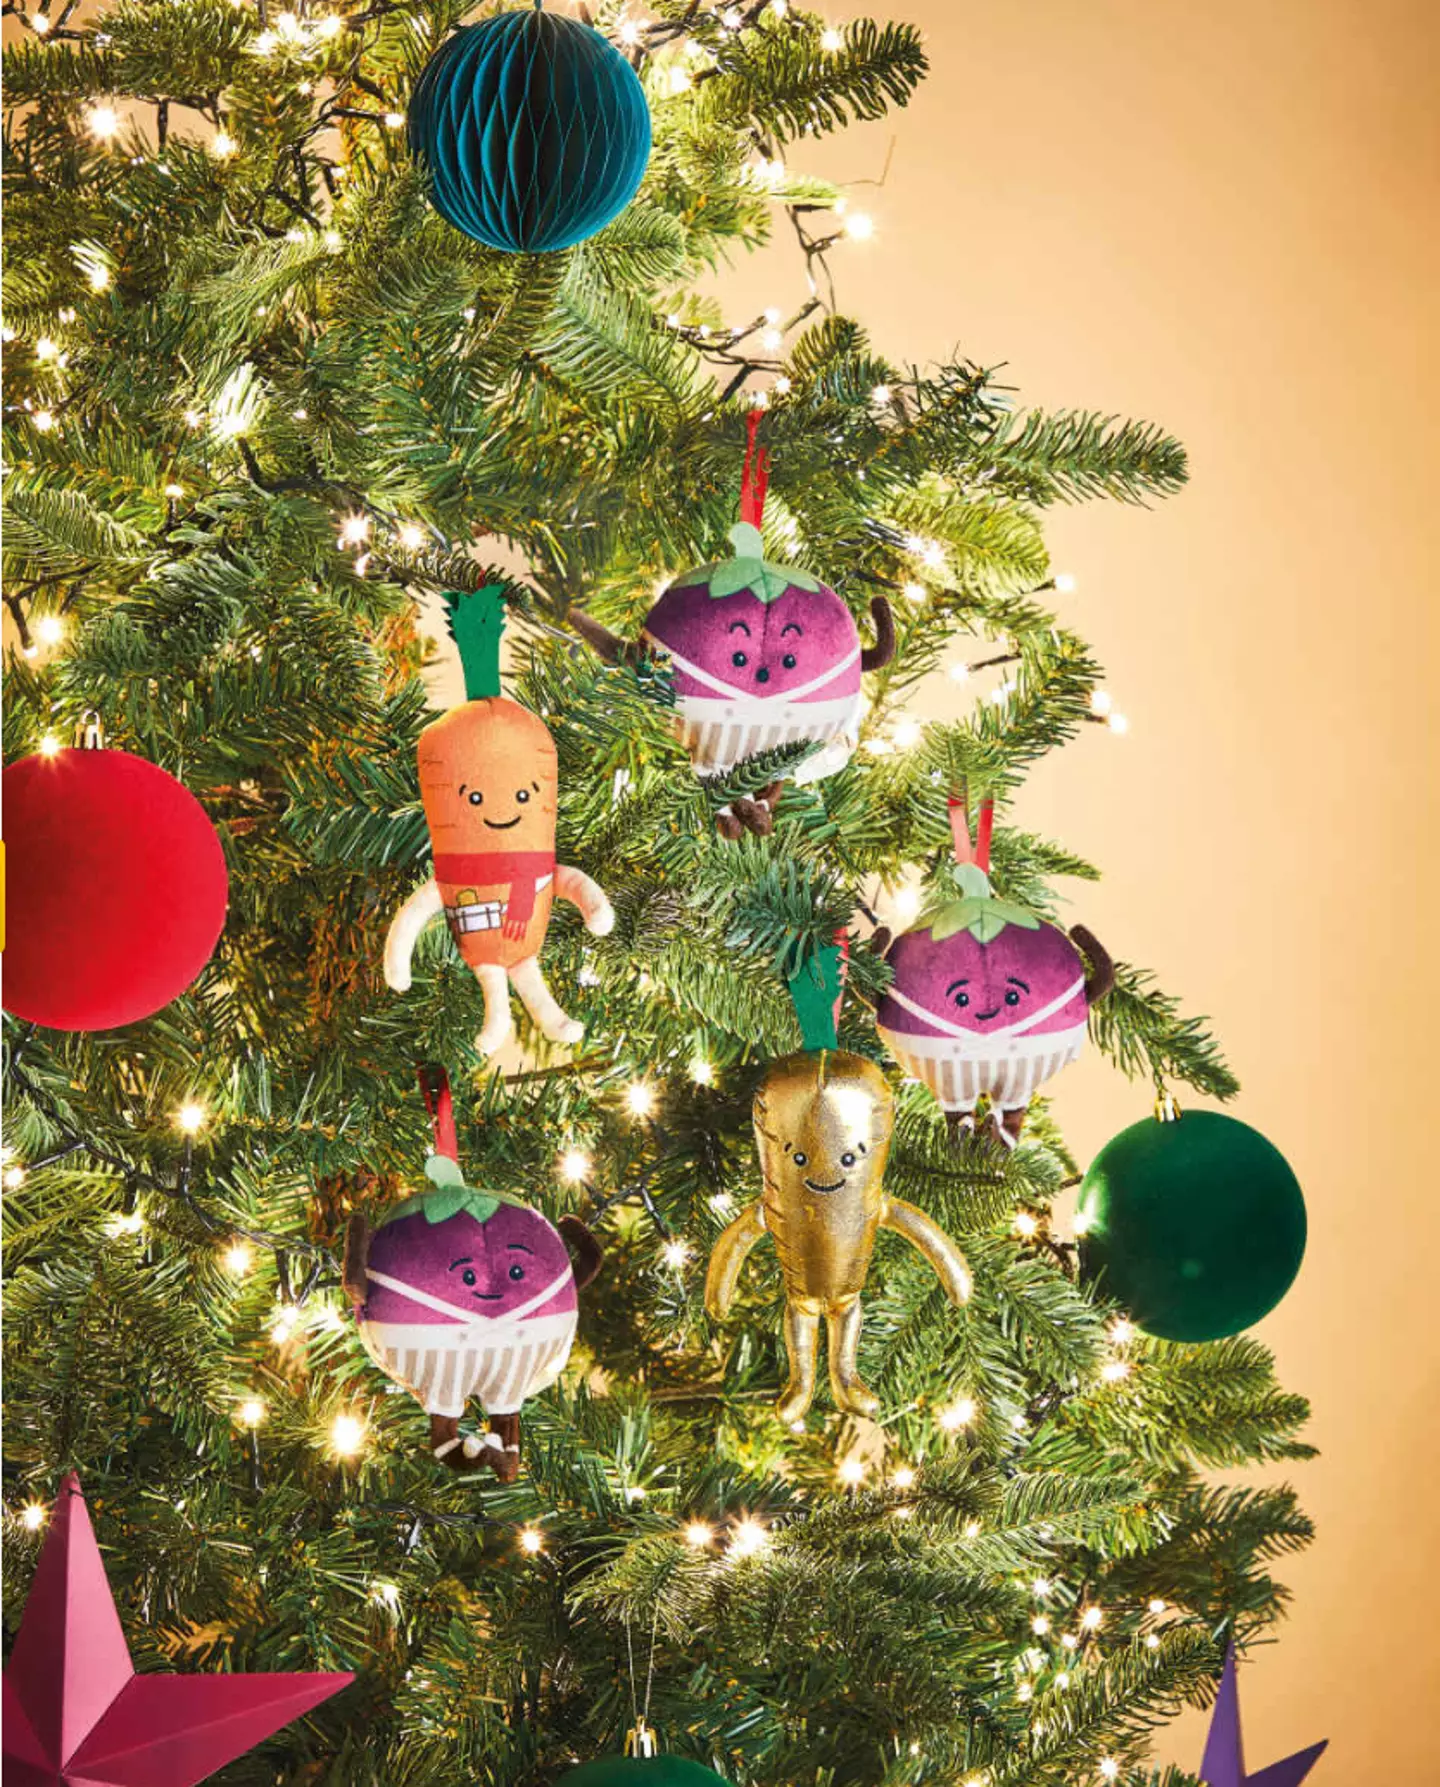 Plus tree decorations are going on sale from £2.99 each.